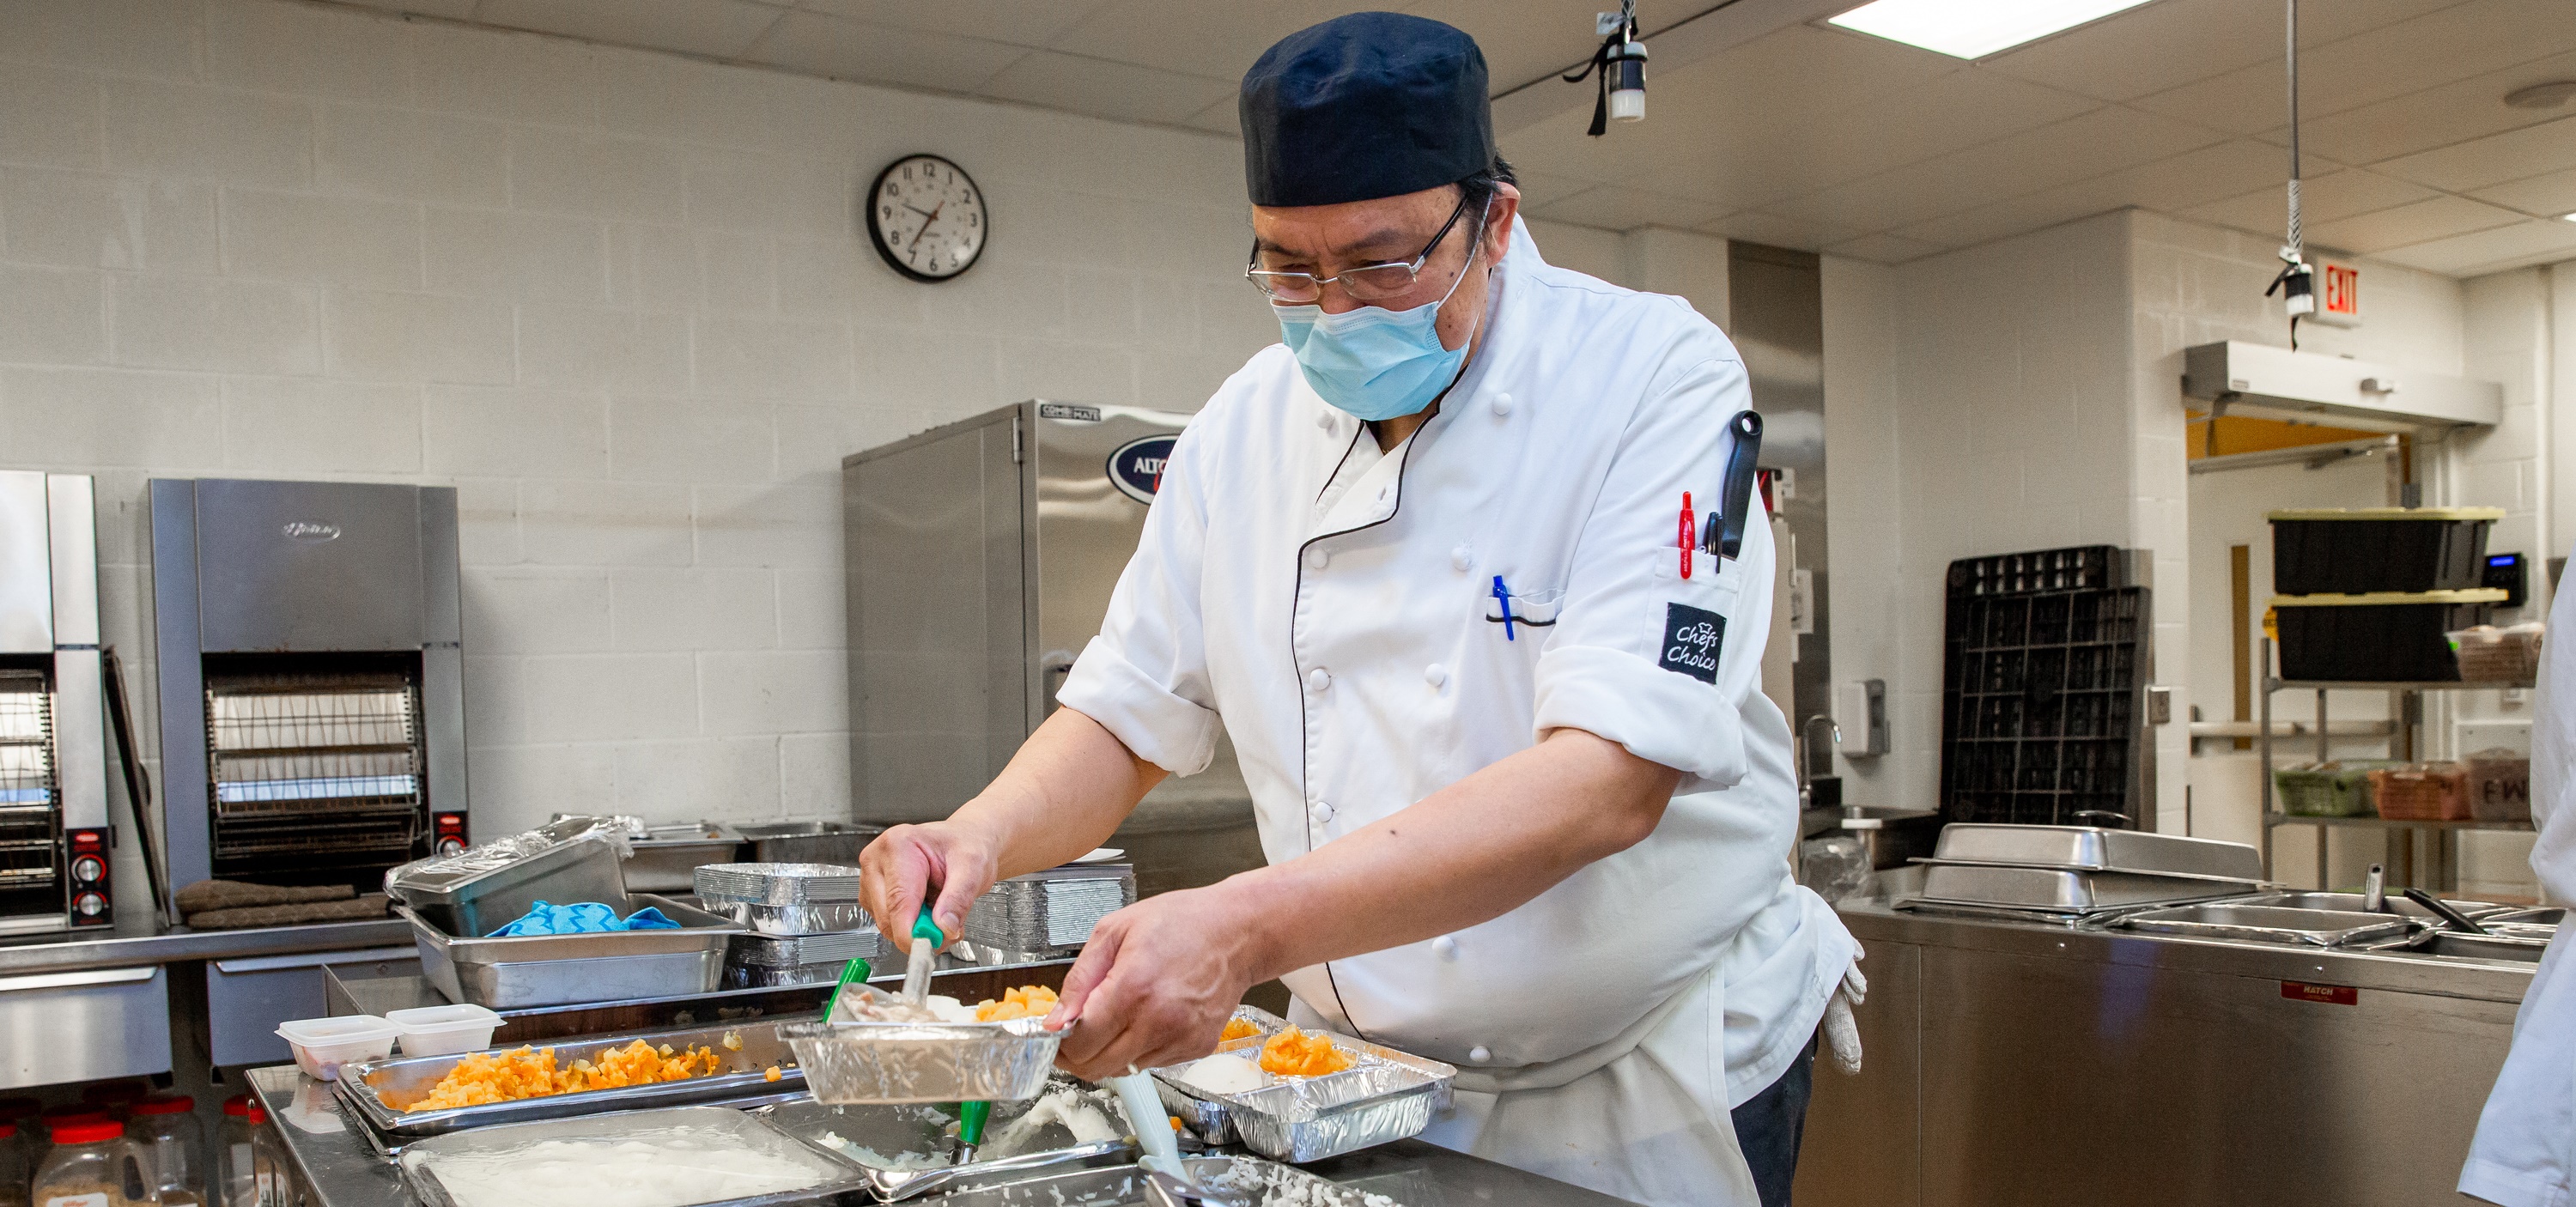 A man in a chef uniform preparing meals in a large industrial kitchen